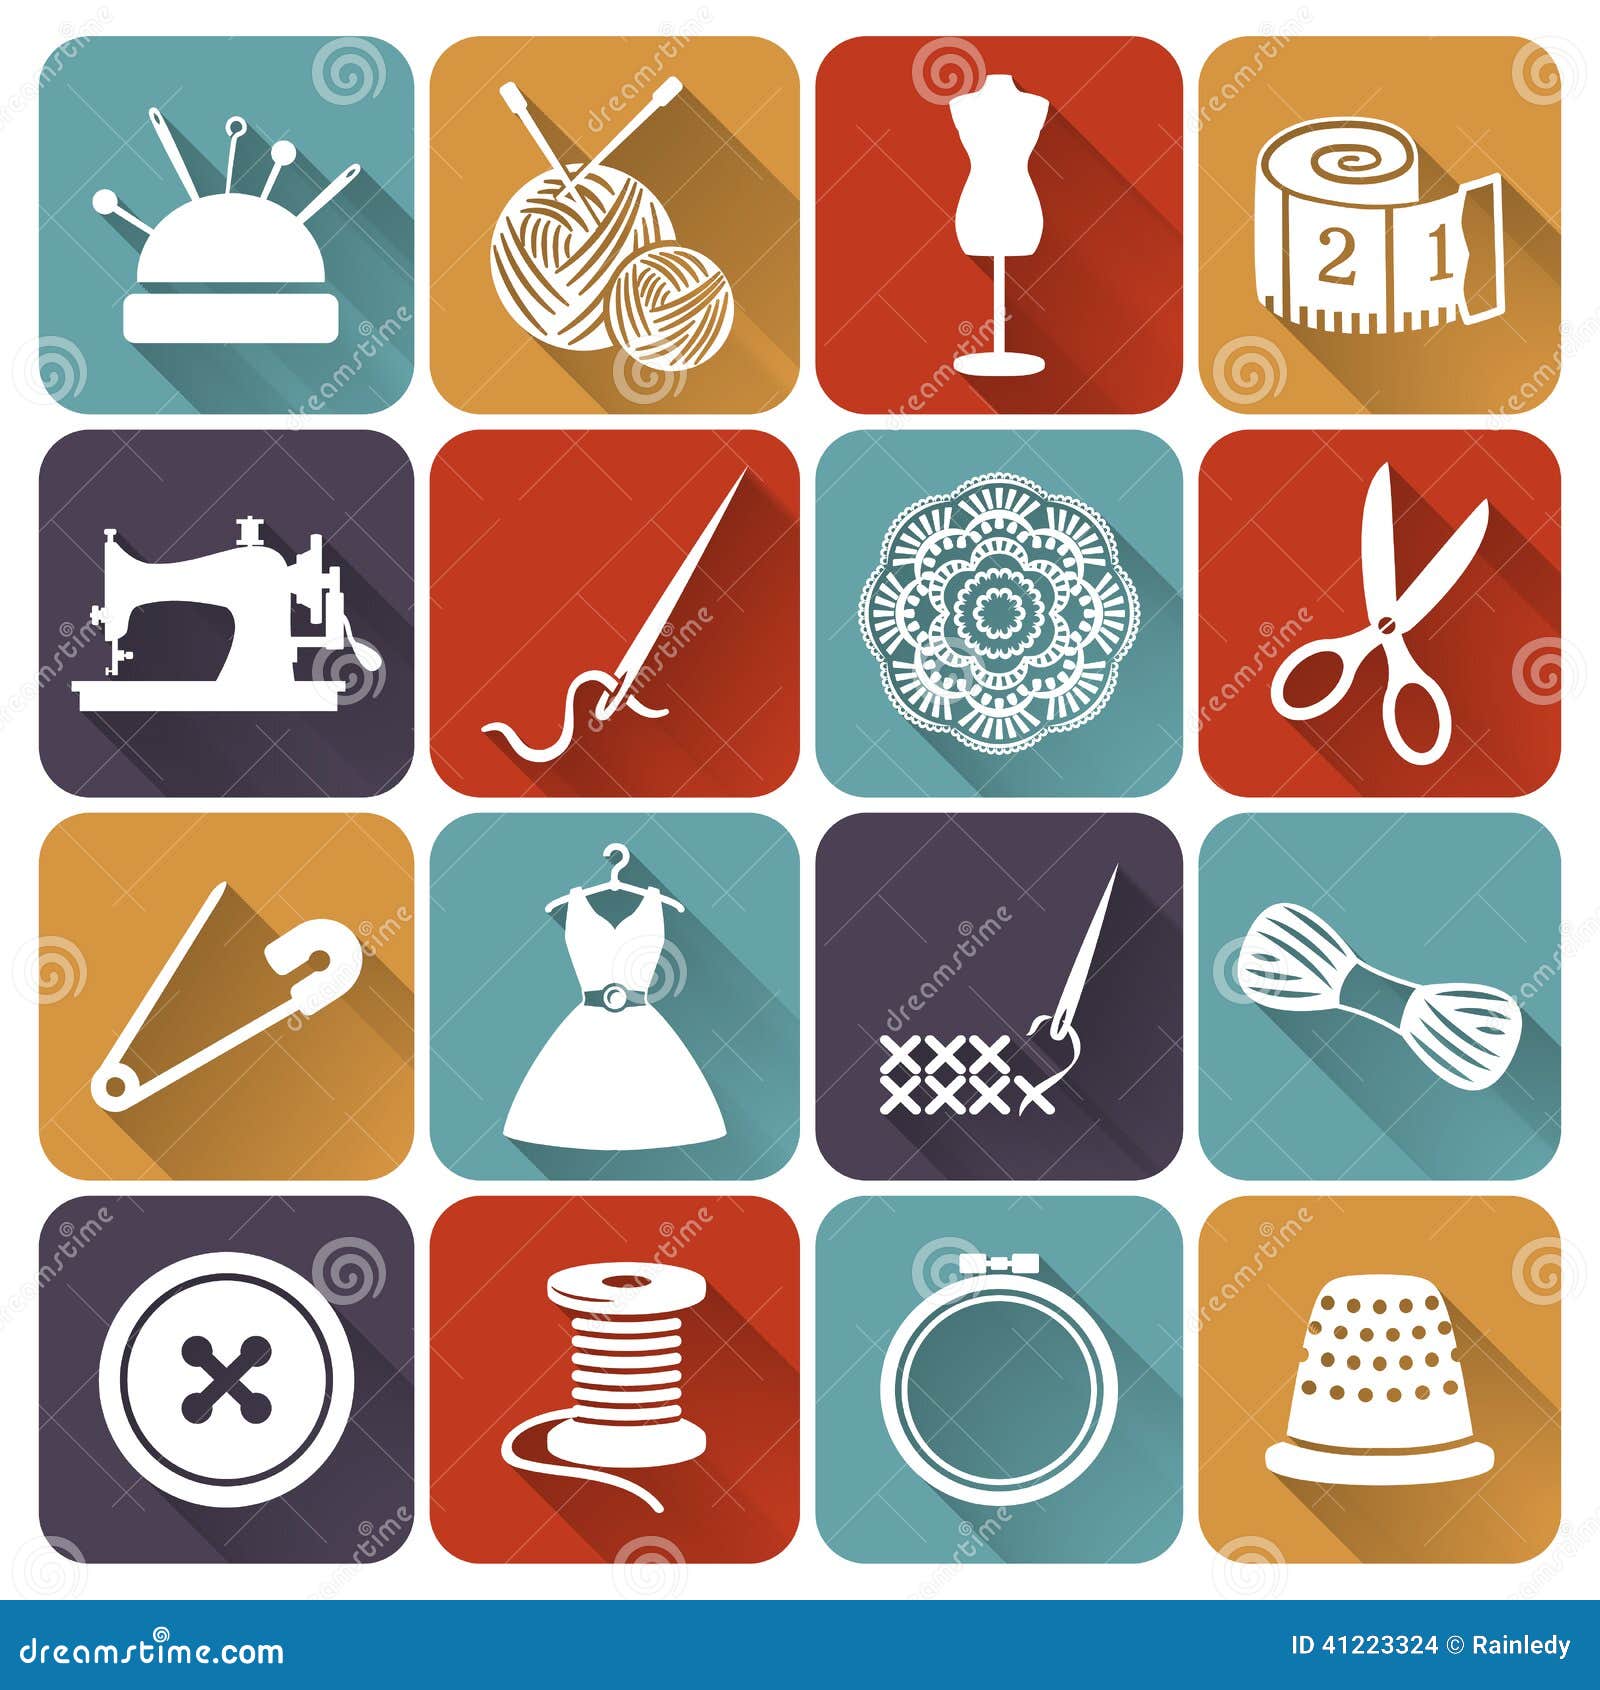 equipment office icon Vector And Set. Sewing Flat Needlework Stock Icons. Vector